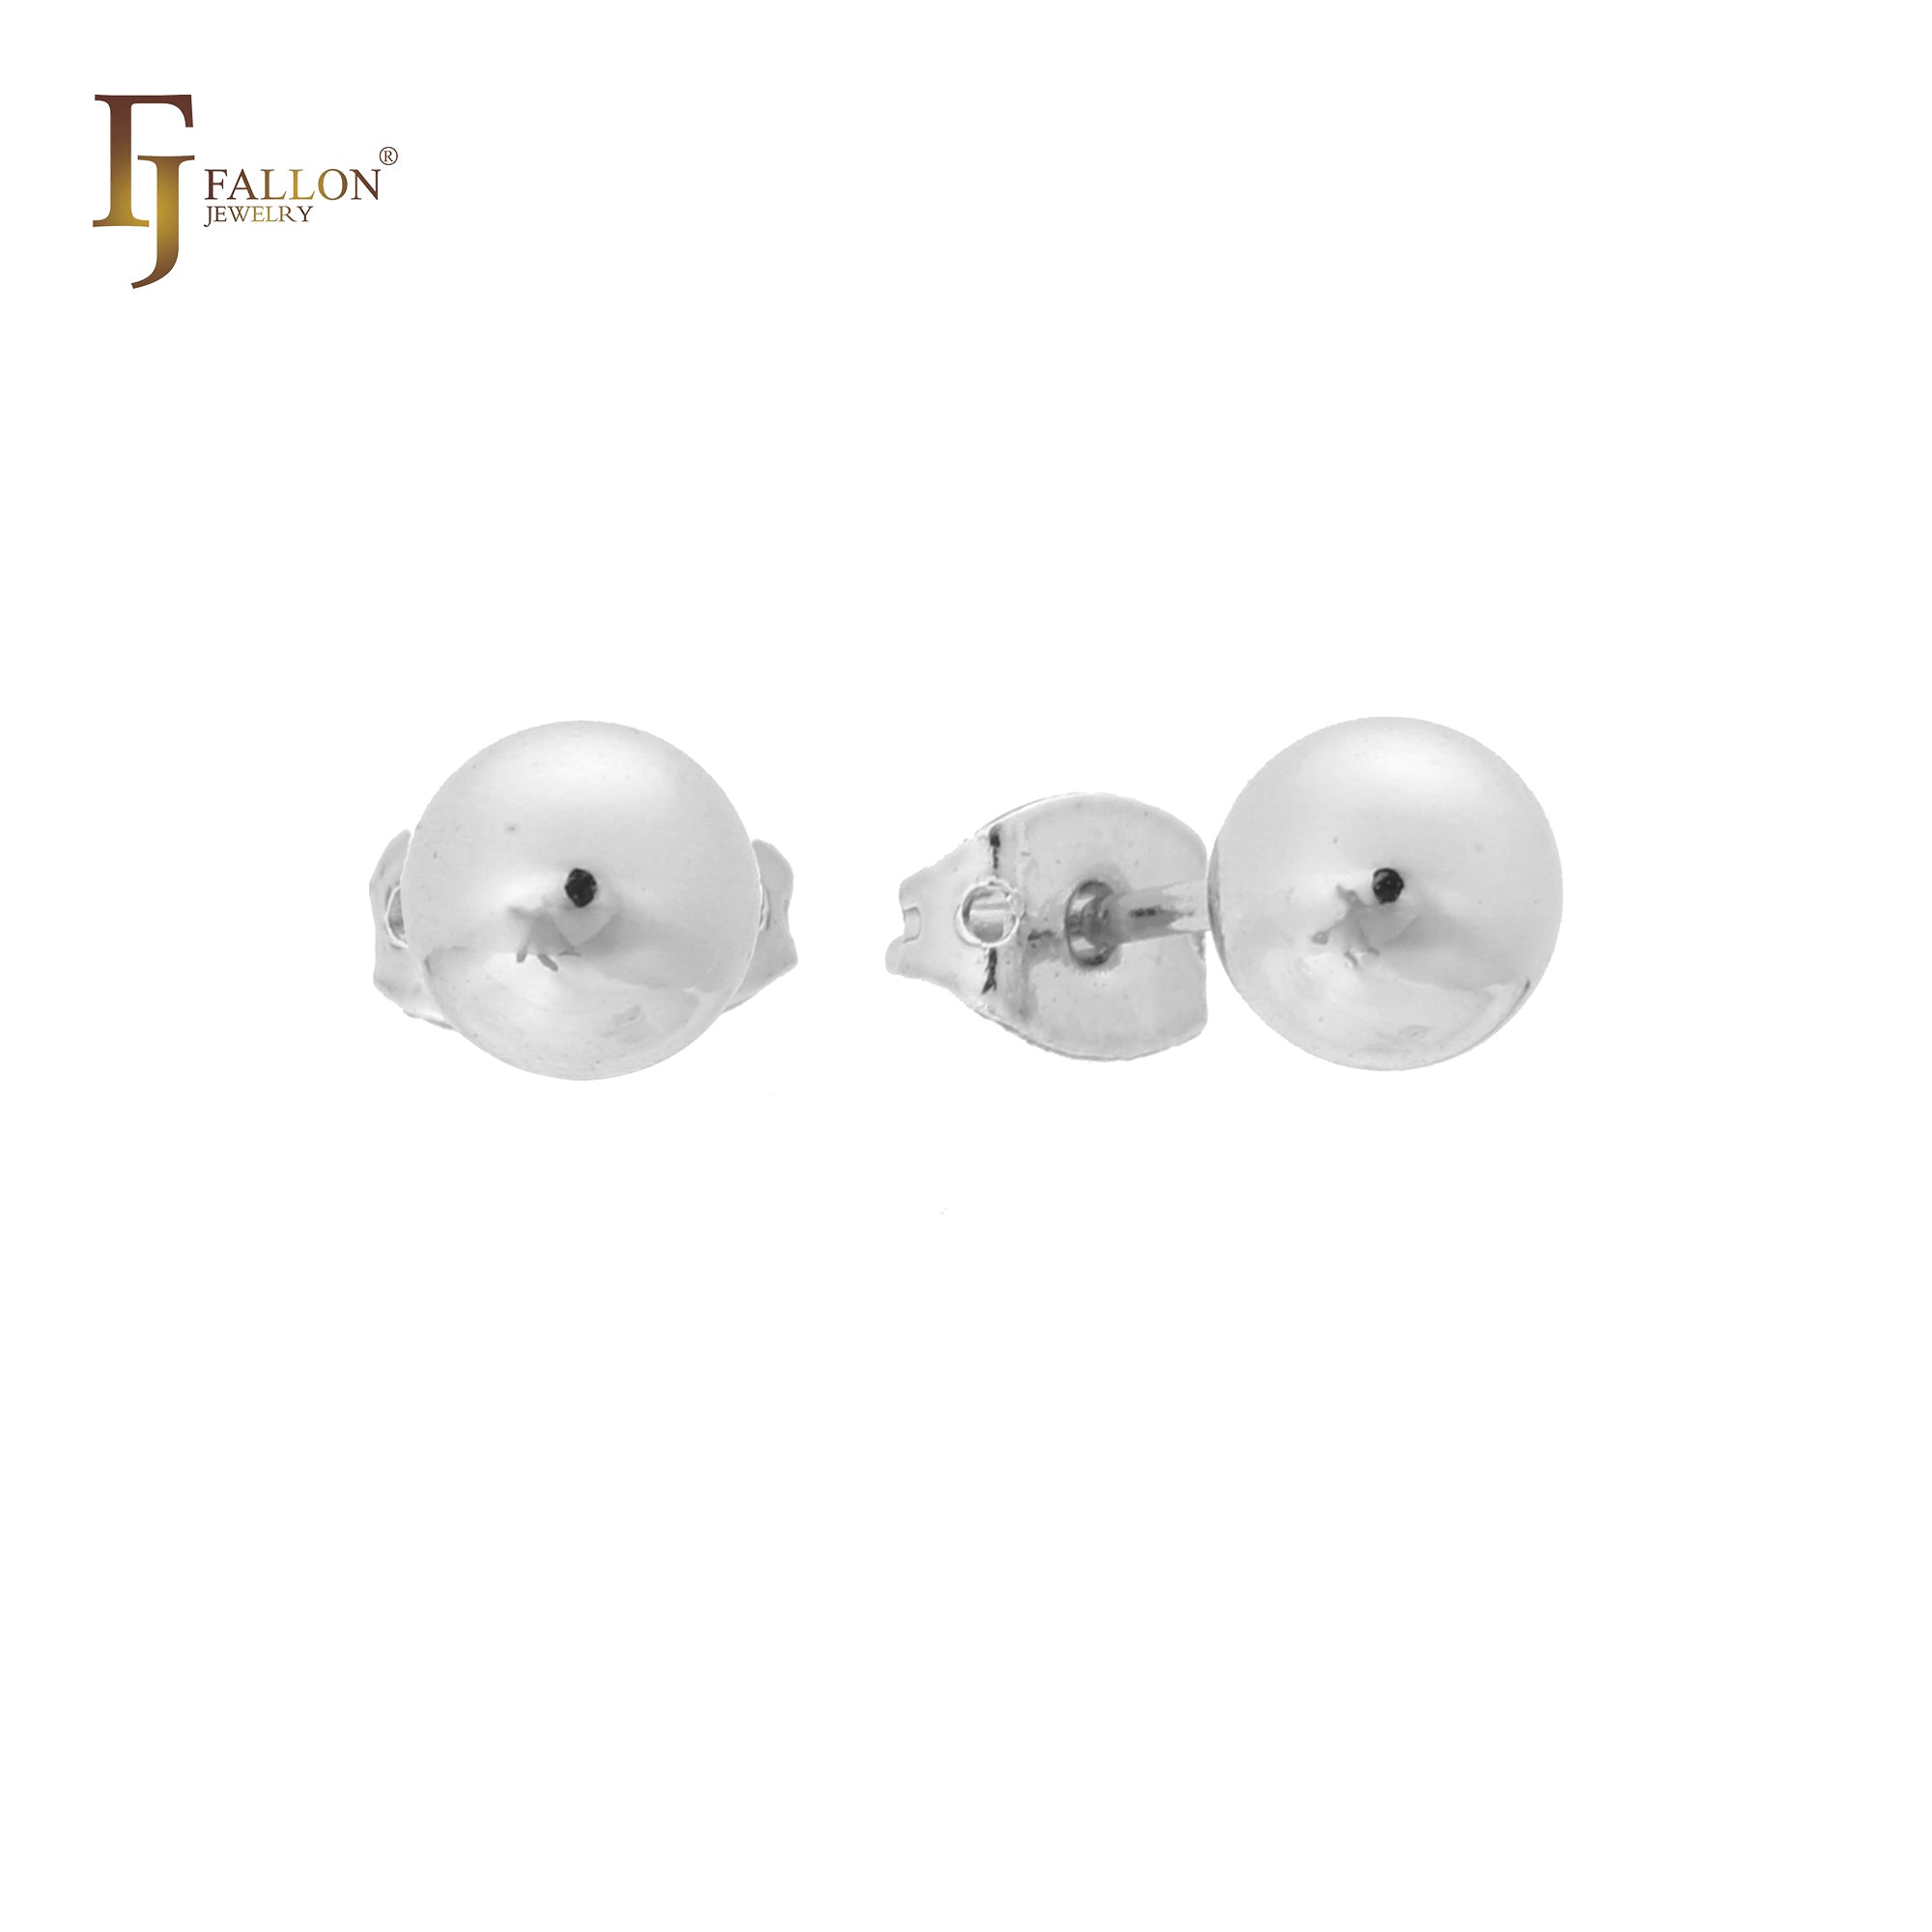 Beads stud earrings in 14K Gold, Rose Gold plating colors